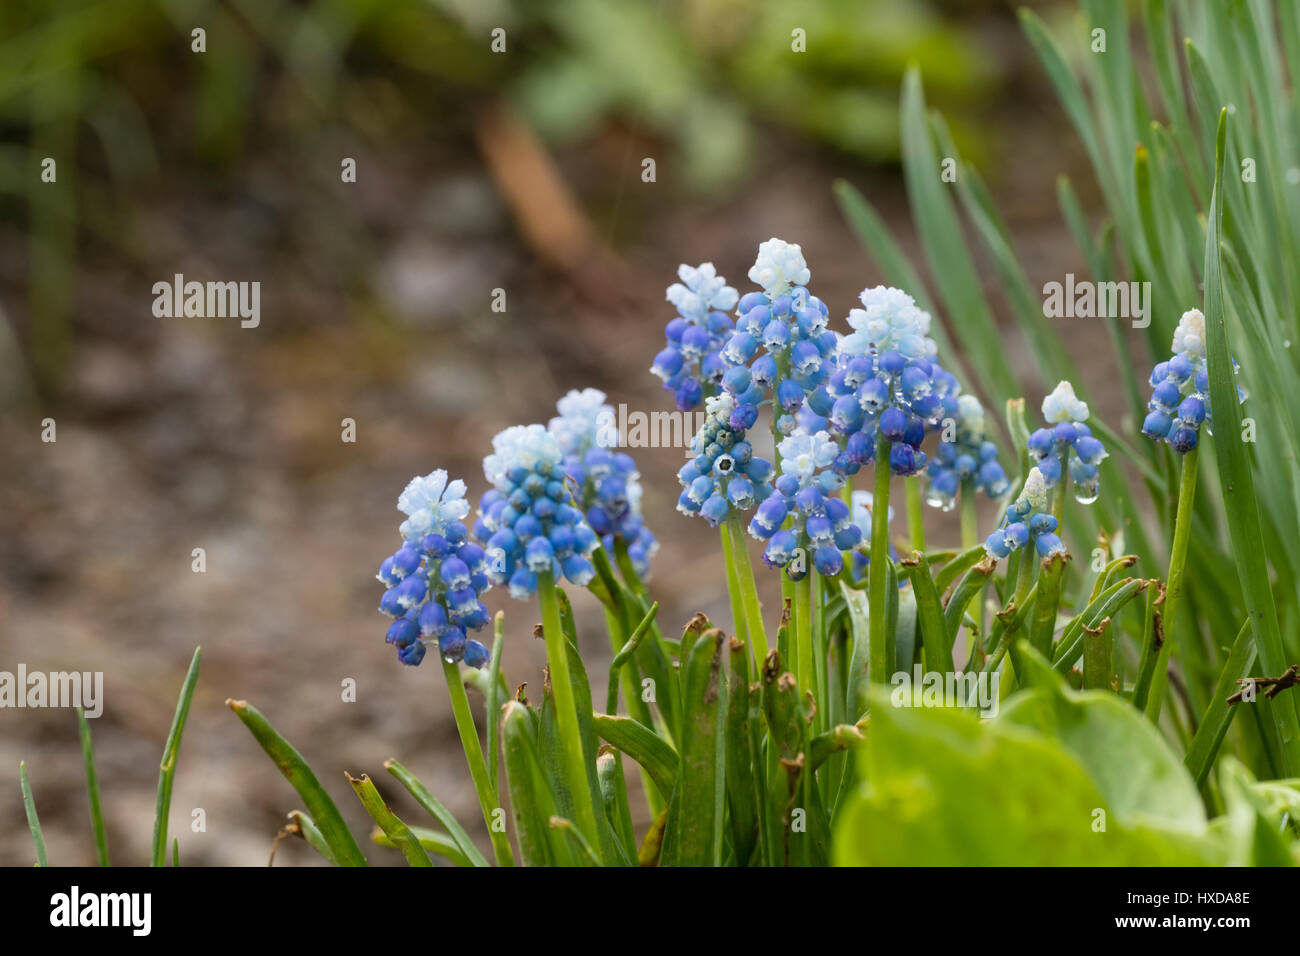 White buds open to blue flowers to give a two toned effect in the grape hyacinth, Muscari aucheri 'Mount Hood' Stock Photo